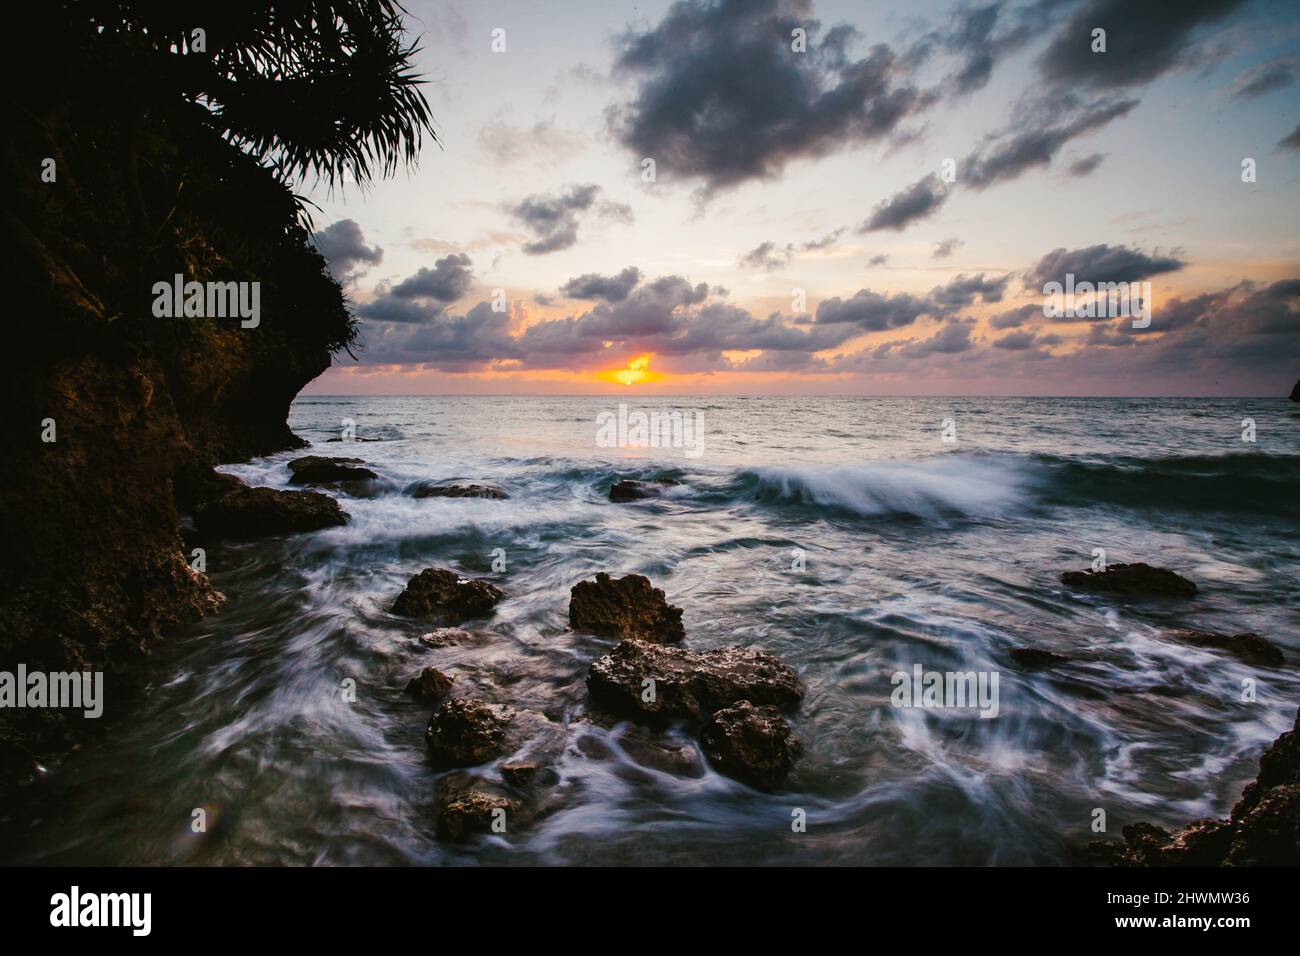 Ocean waves landscape with sunset and rocks Stock Photo